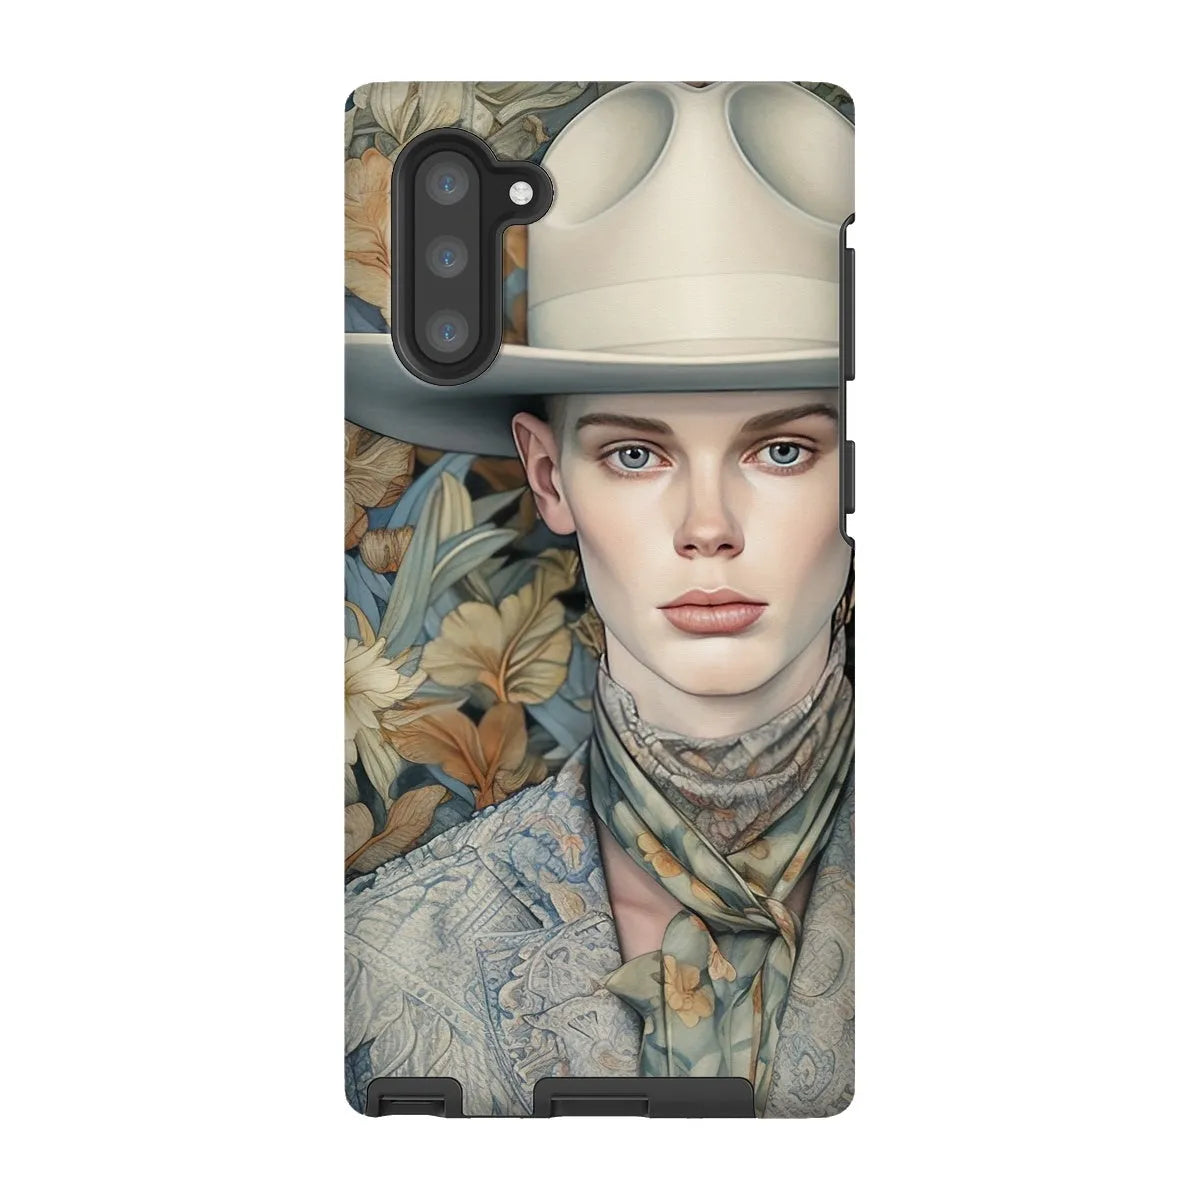 Jasper The Gay Cowboy - Dandy Gay Aesthetic Art Phone Case - Samsung Galaxy Note 10 / Matte - Mobile Phone Cases